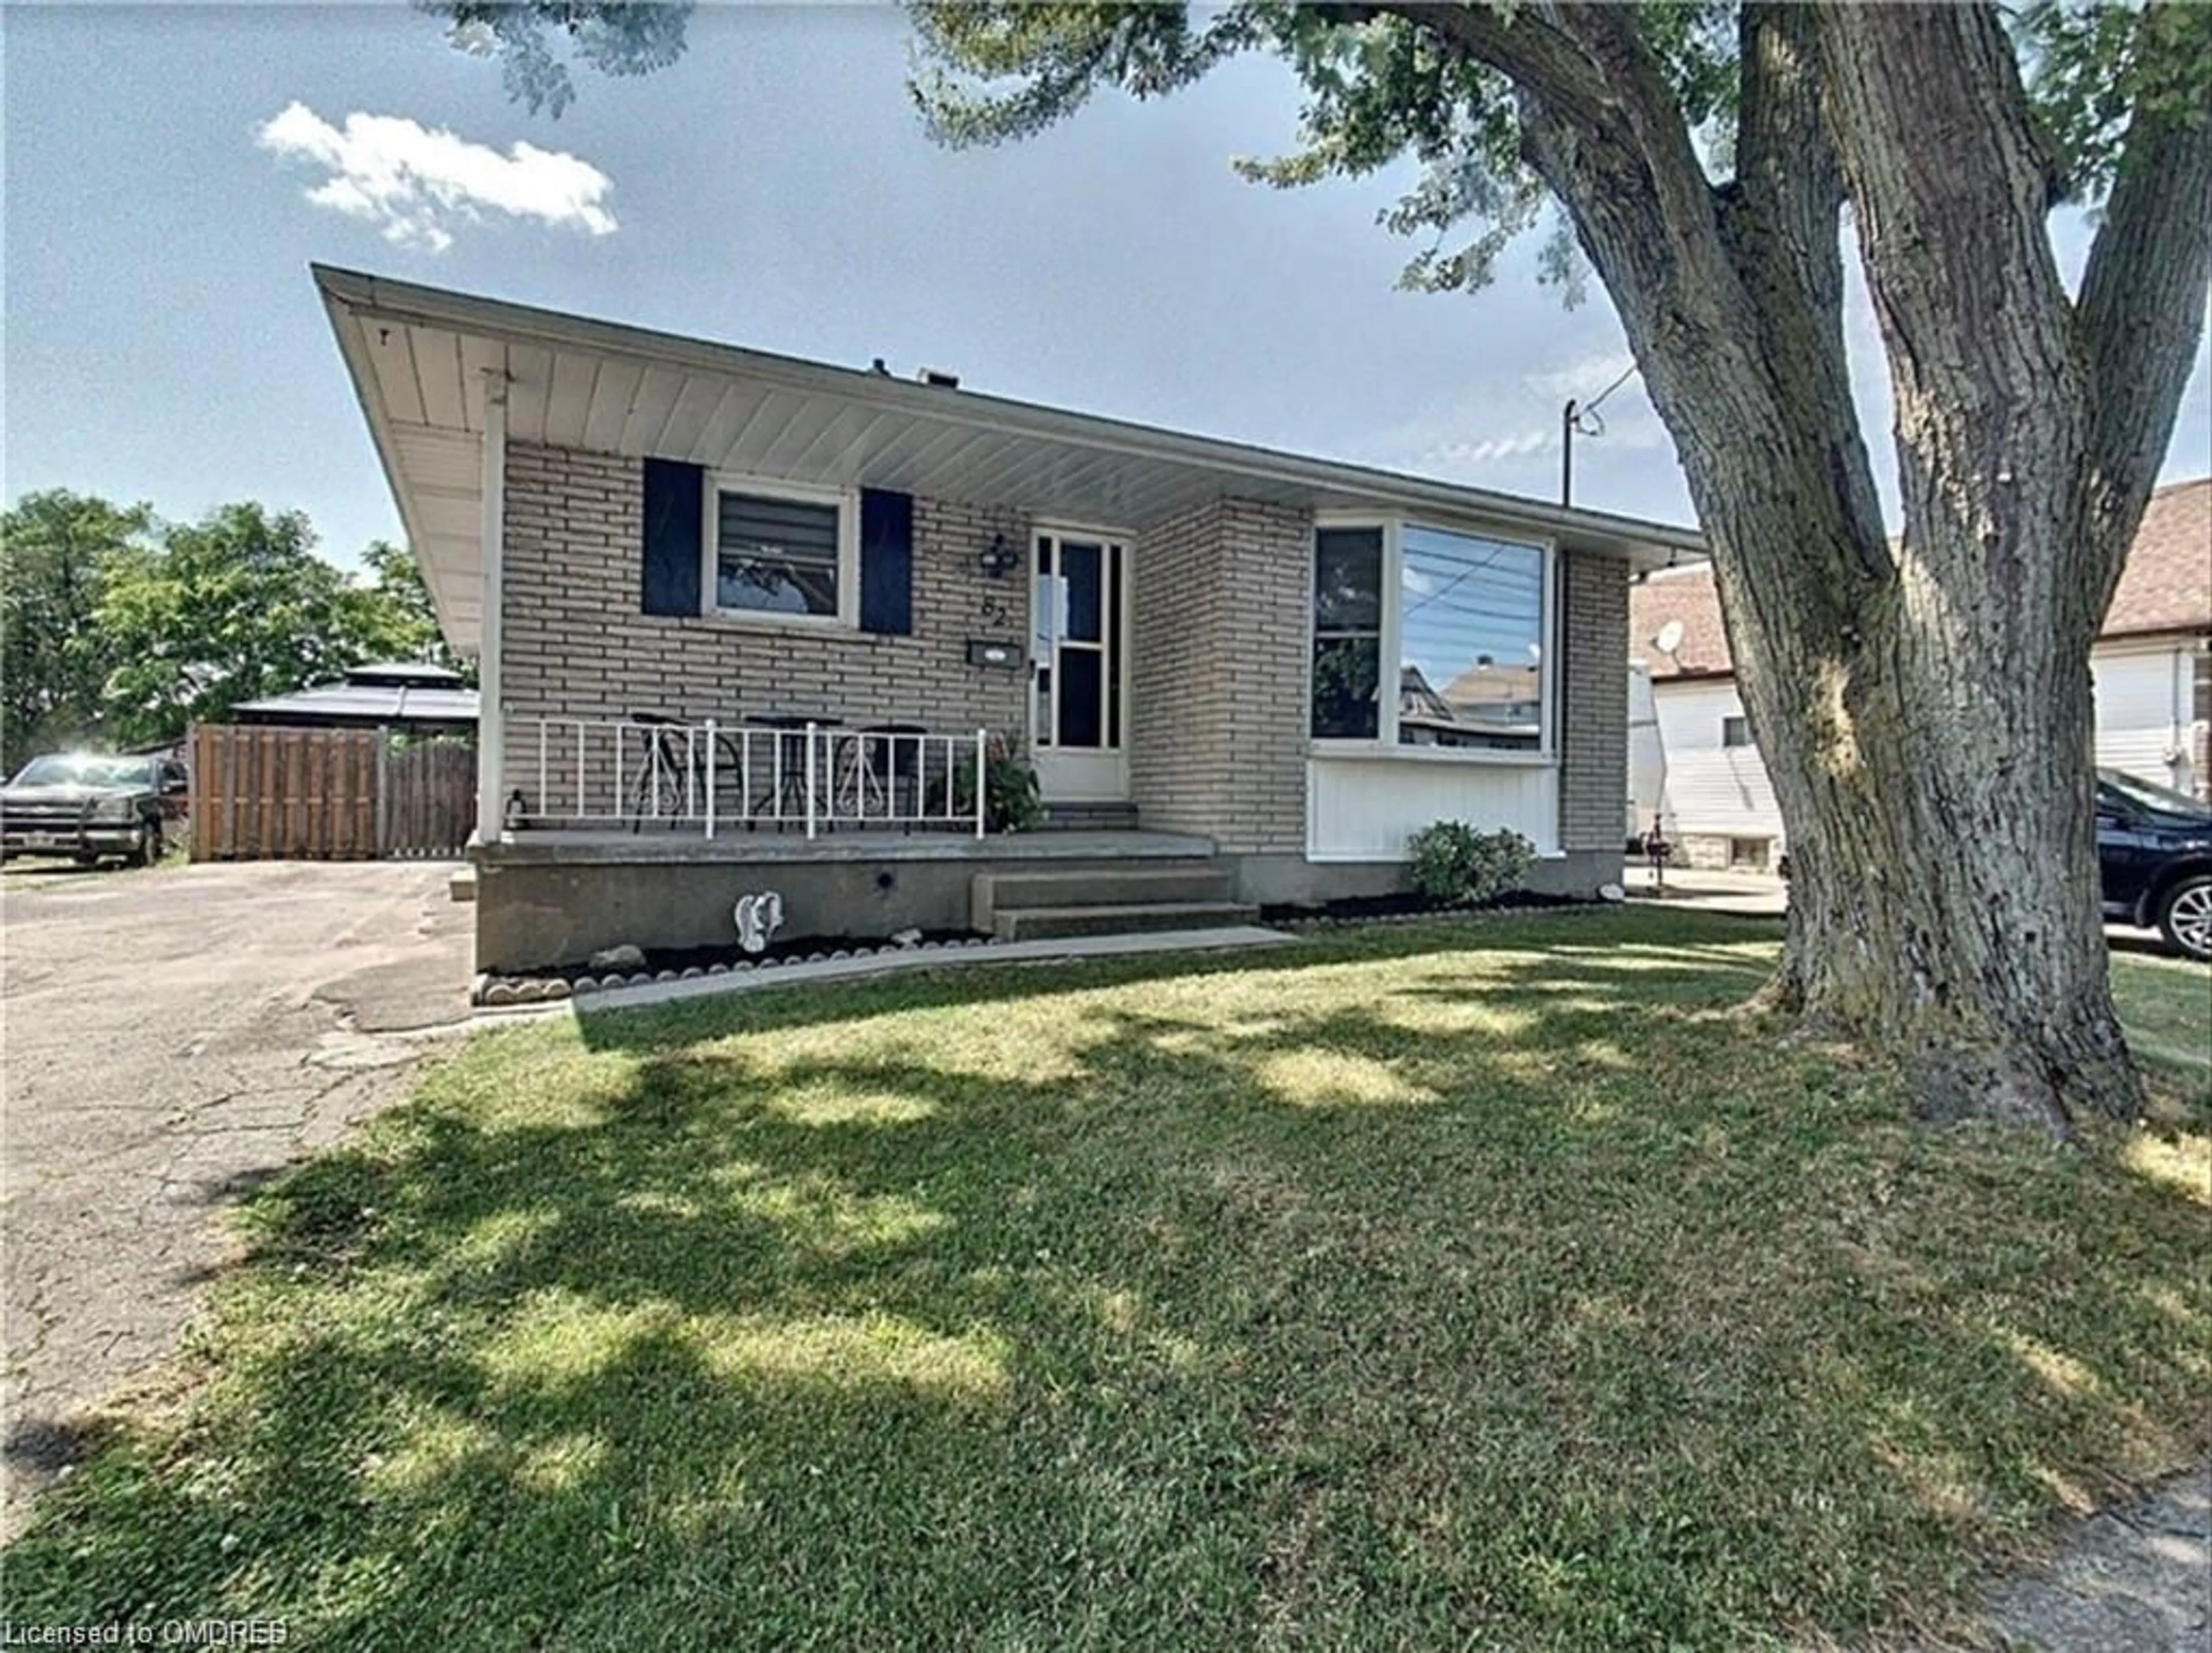 Frontside or backside of a home for 82 Deere St, Welland Ontario L3B 2L8